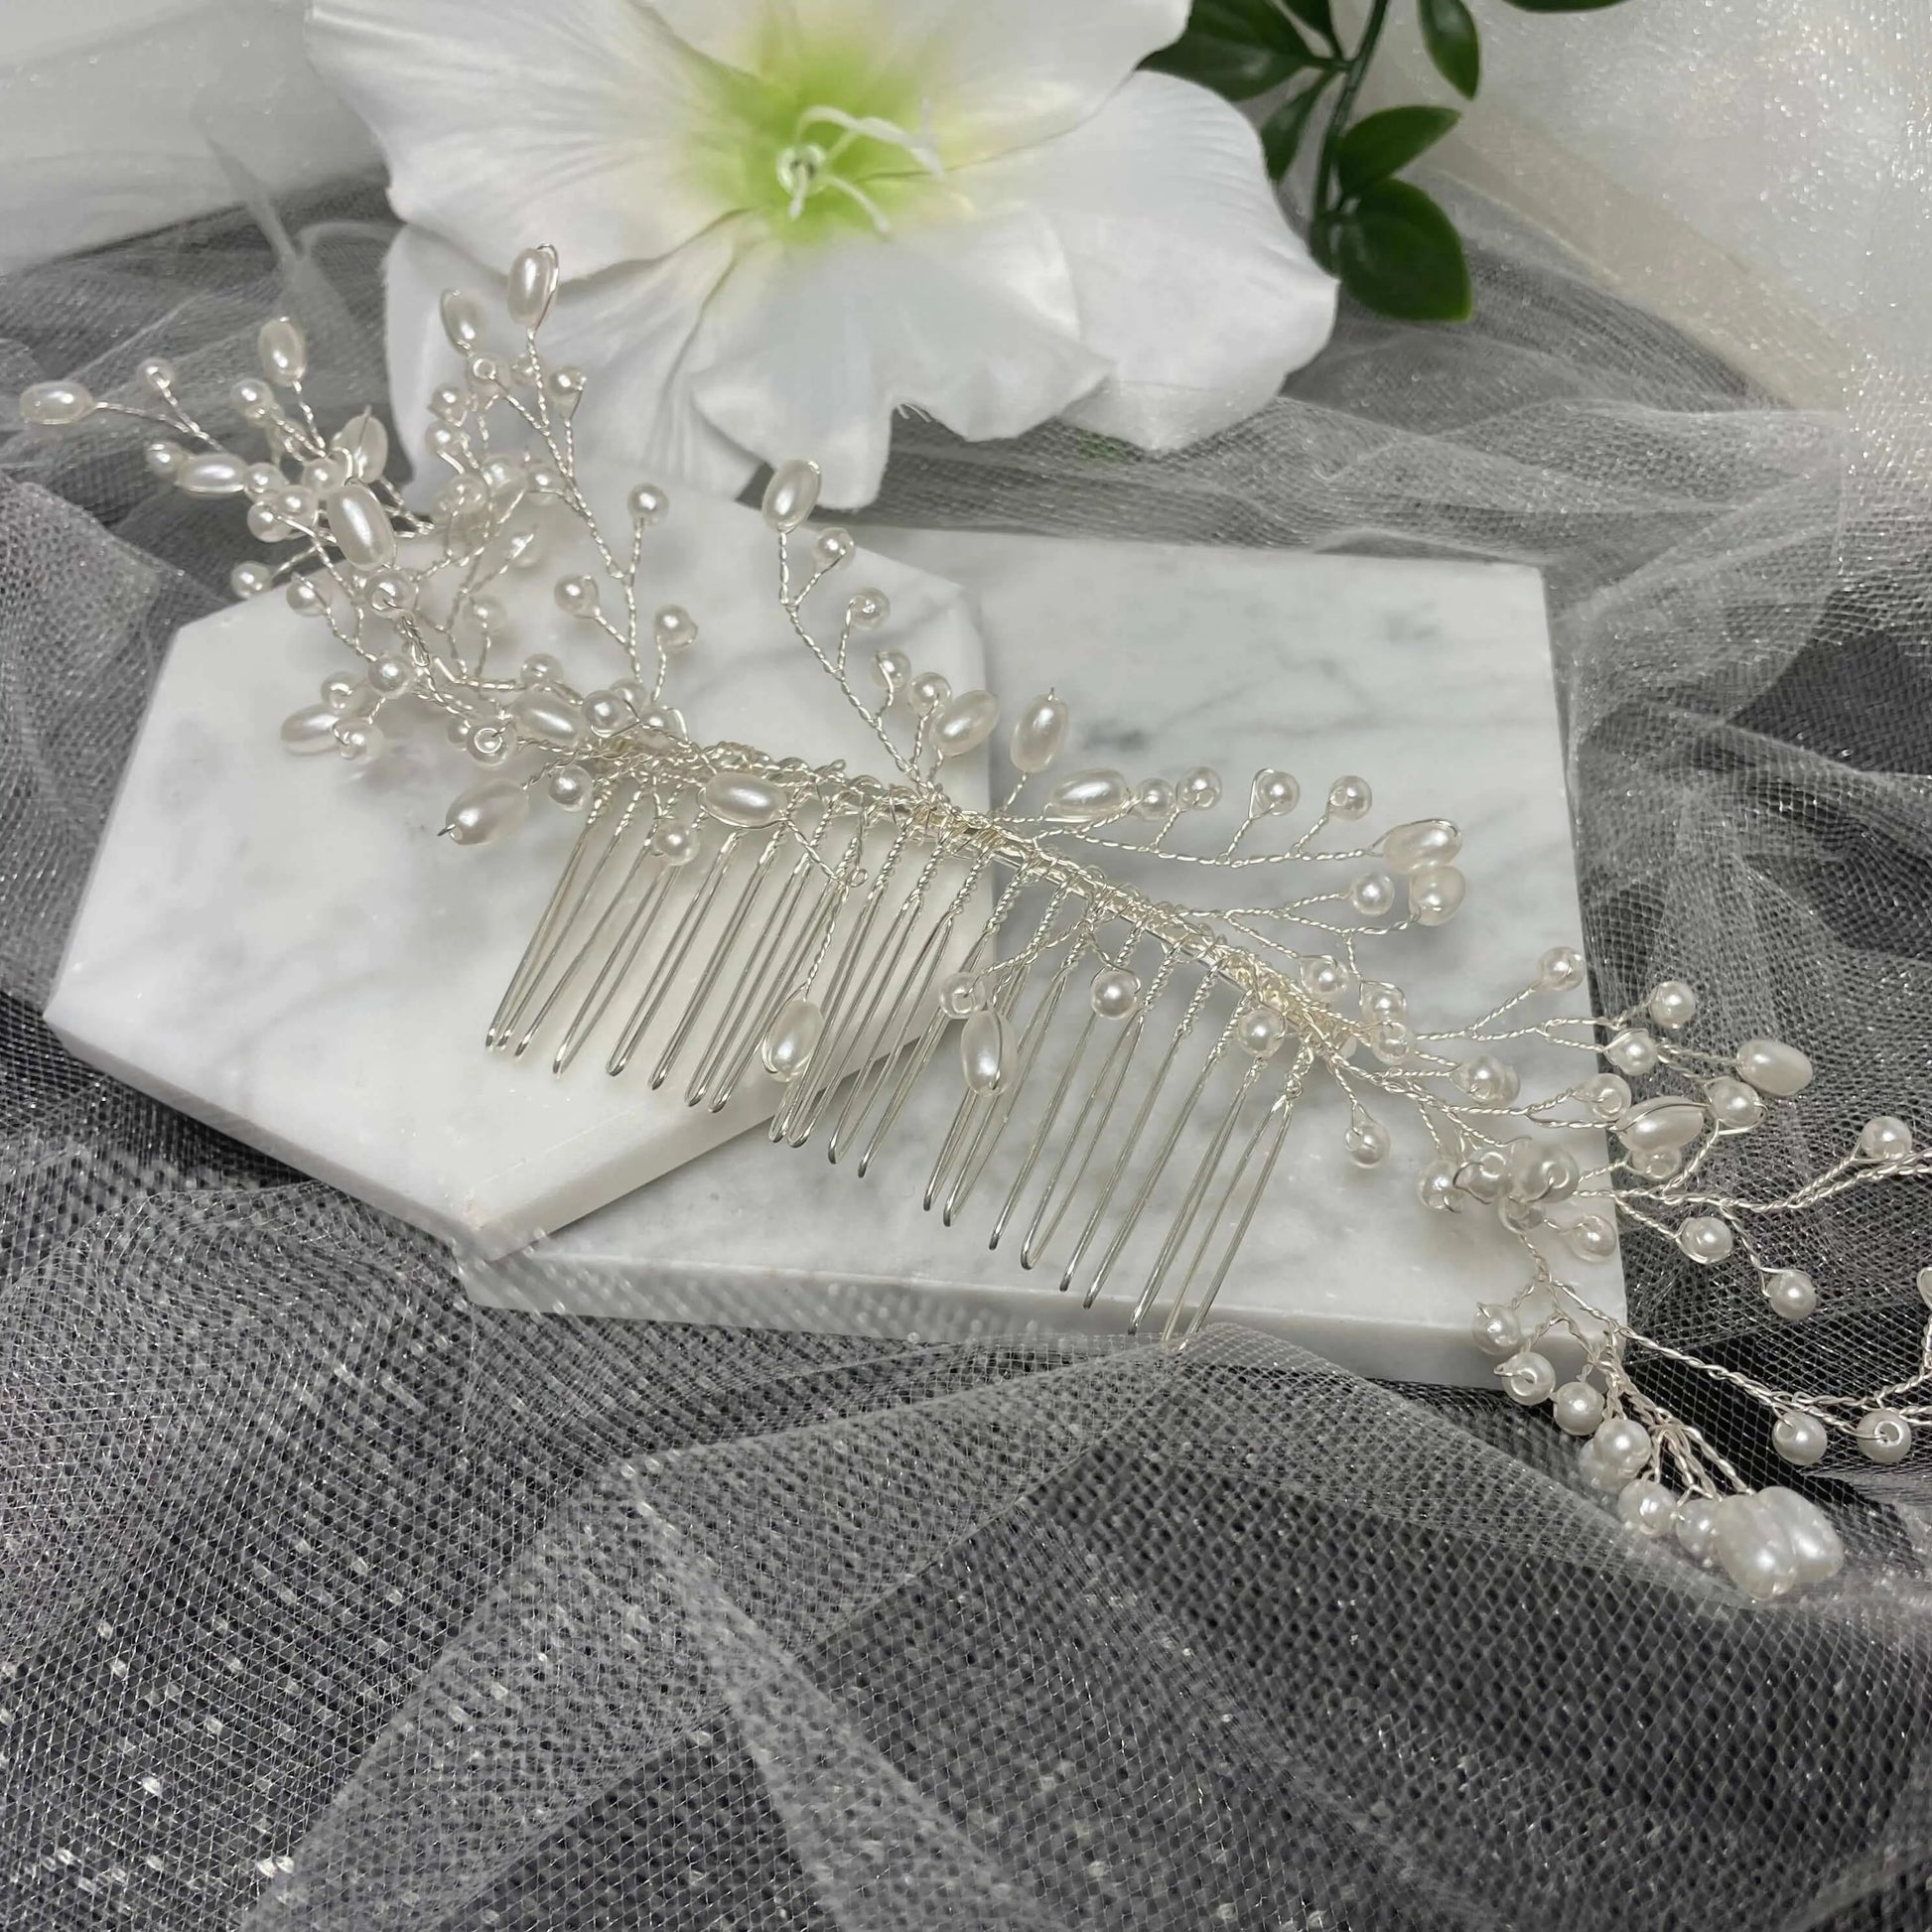 LUCIANA Handmade Pearl Hair Comb featuring delicate pearls and intricate design, measuring approximately 23 cm by 4 cm, perfect for weddings and special occasions.